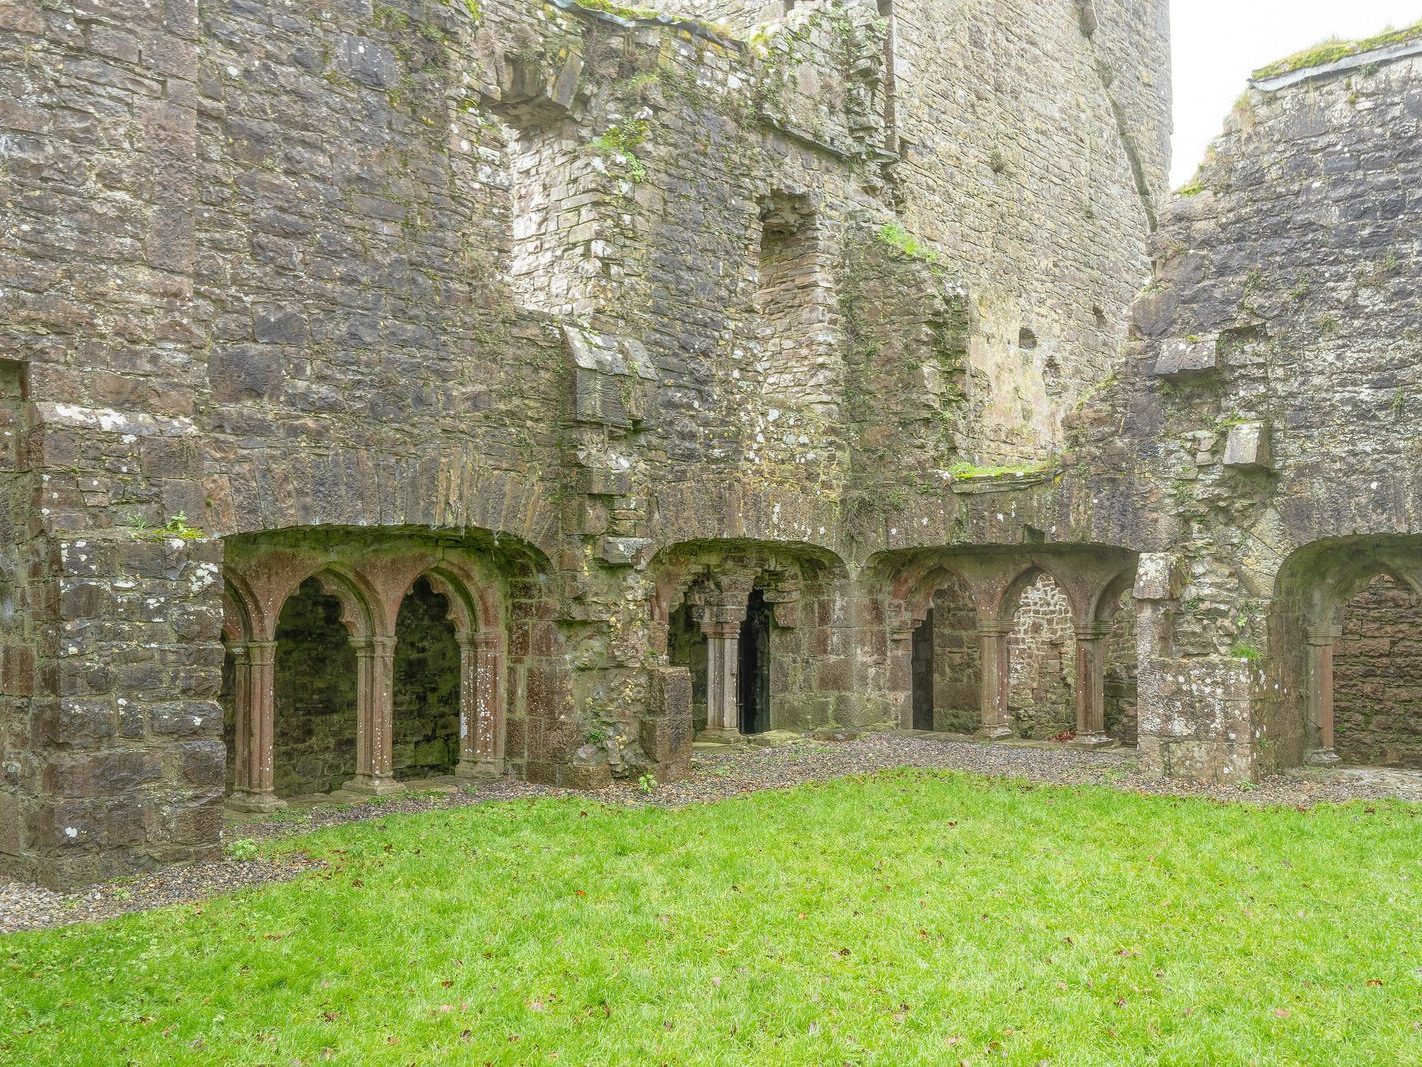 BECTIVE ABBEY WHICH I VISITED LAST CHRISTMAS [THERE WERE NO OTHER VISITORS AS IT WAS A VERY WET DAY]--225223-1